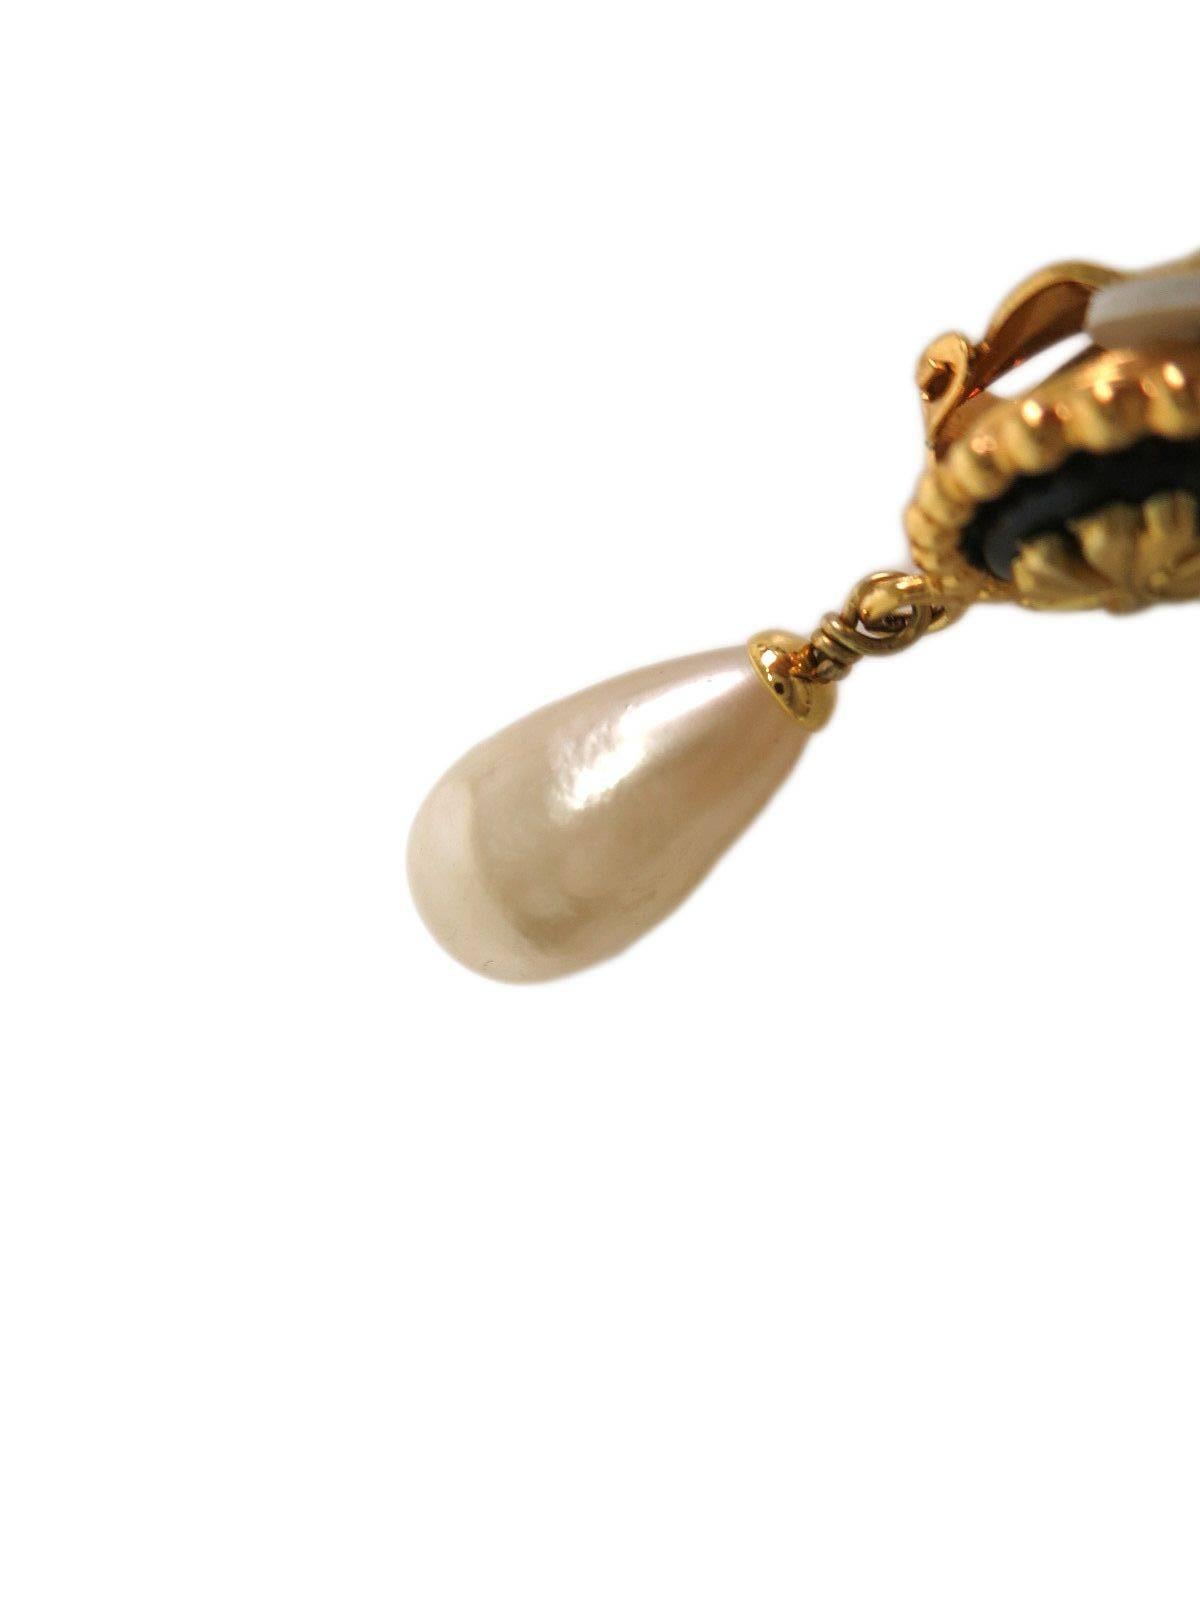 CURATOR'S NOTES

Faux pearl
Gold tone
Clip on closure
Made in France
Drop 1.8